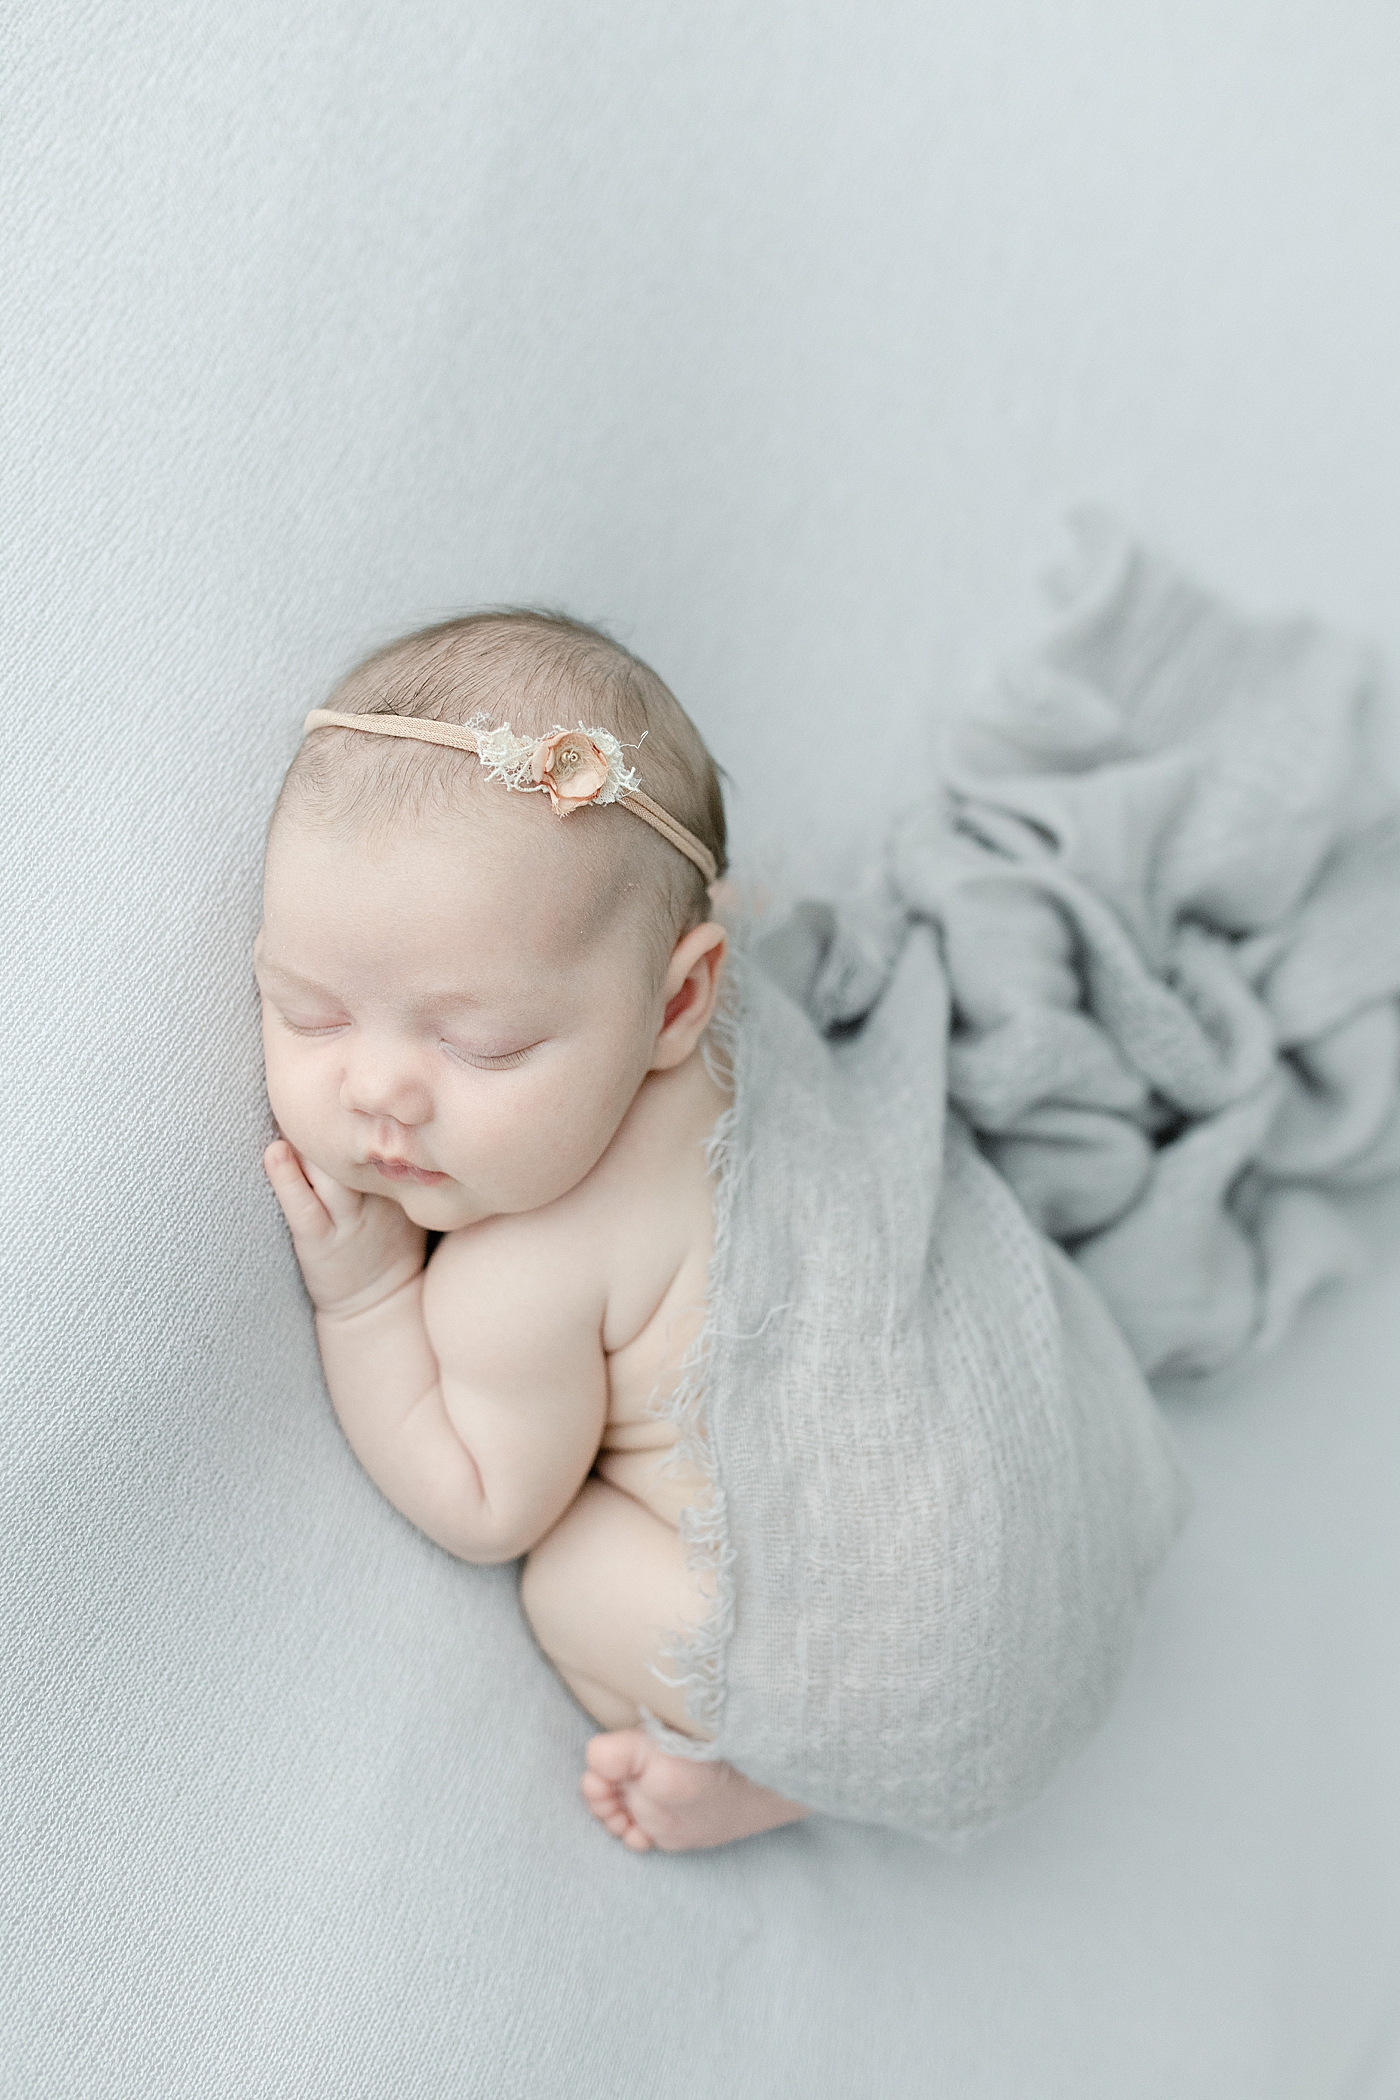 Baby girl asleep on her tummy wrapped in gray swaddle | Photo by Little Sunshine Photography 